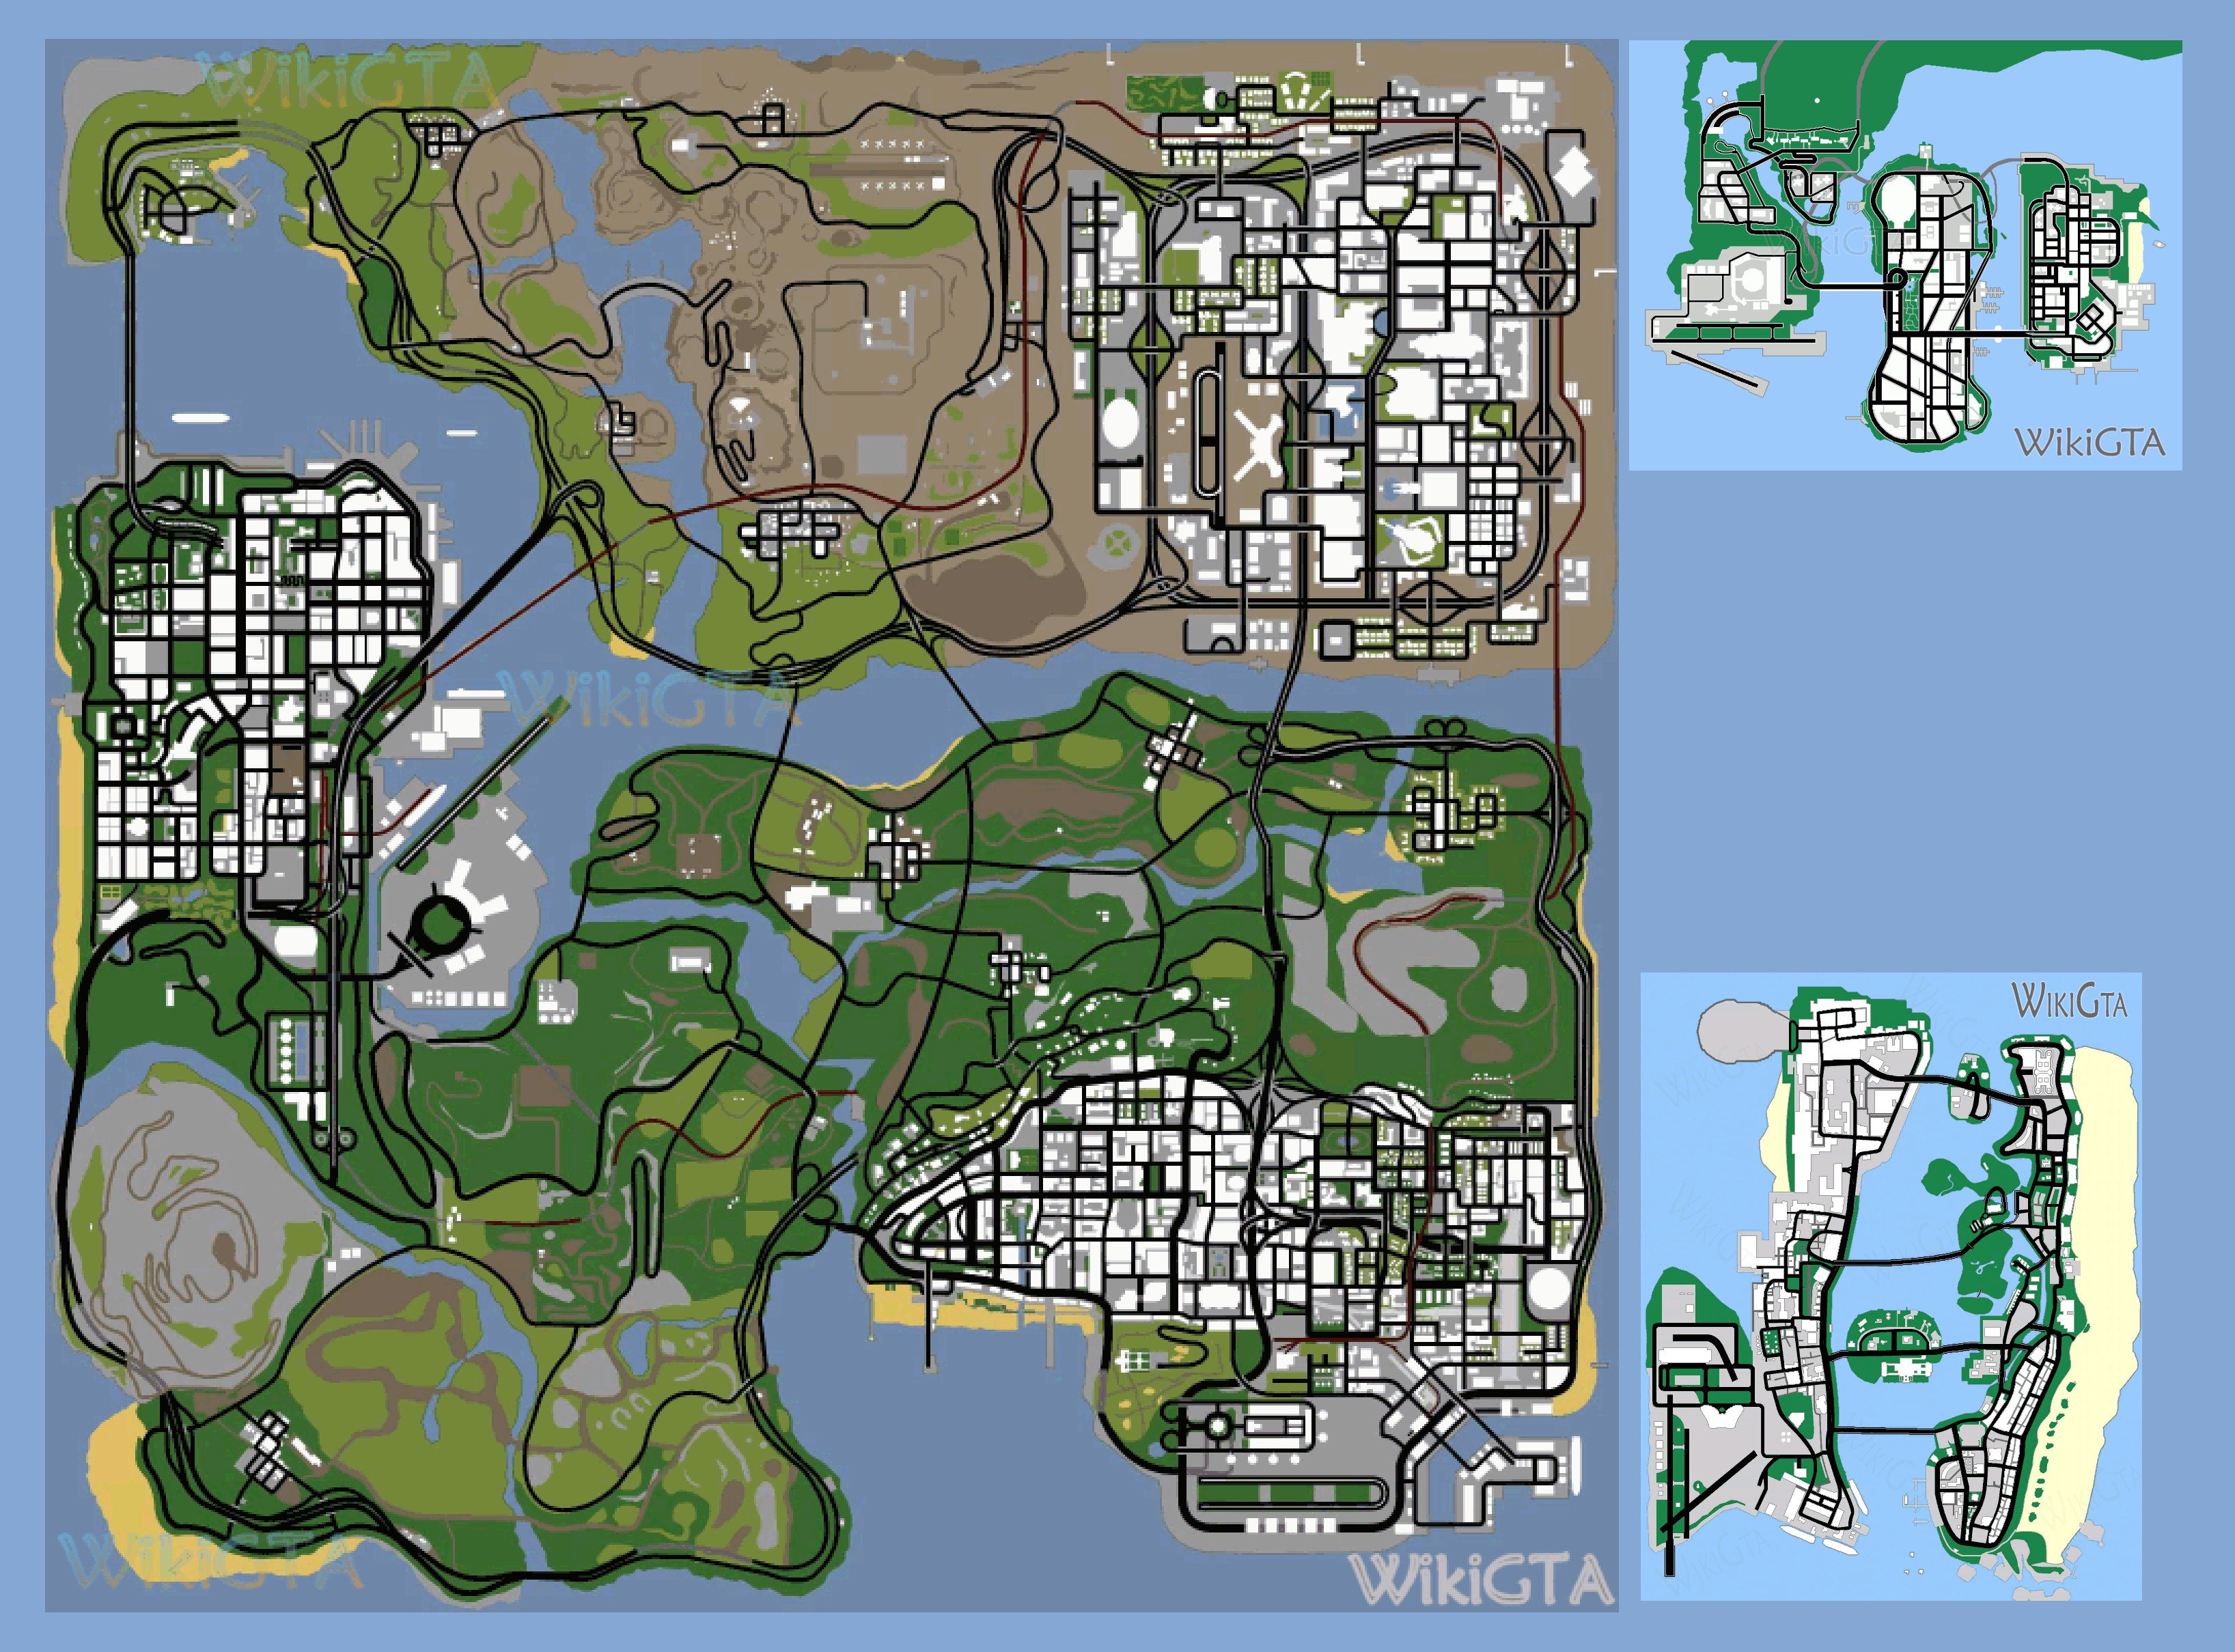 Grand Theft Auto 3  Liberty City Map (Isometric) by VGCartography on  DeviantArt